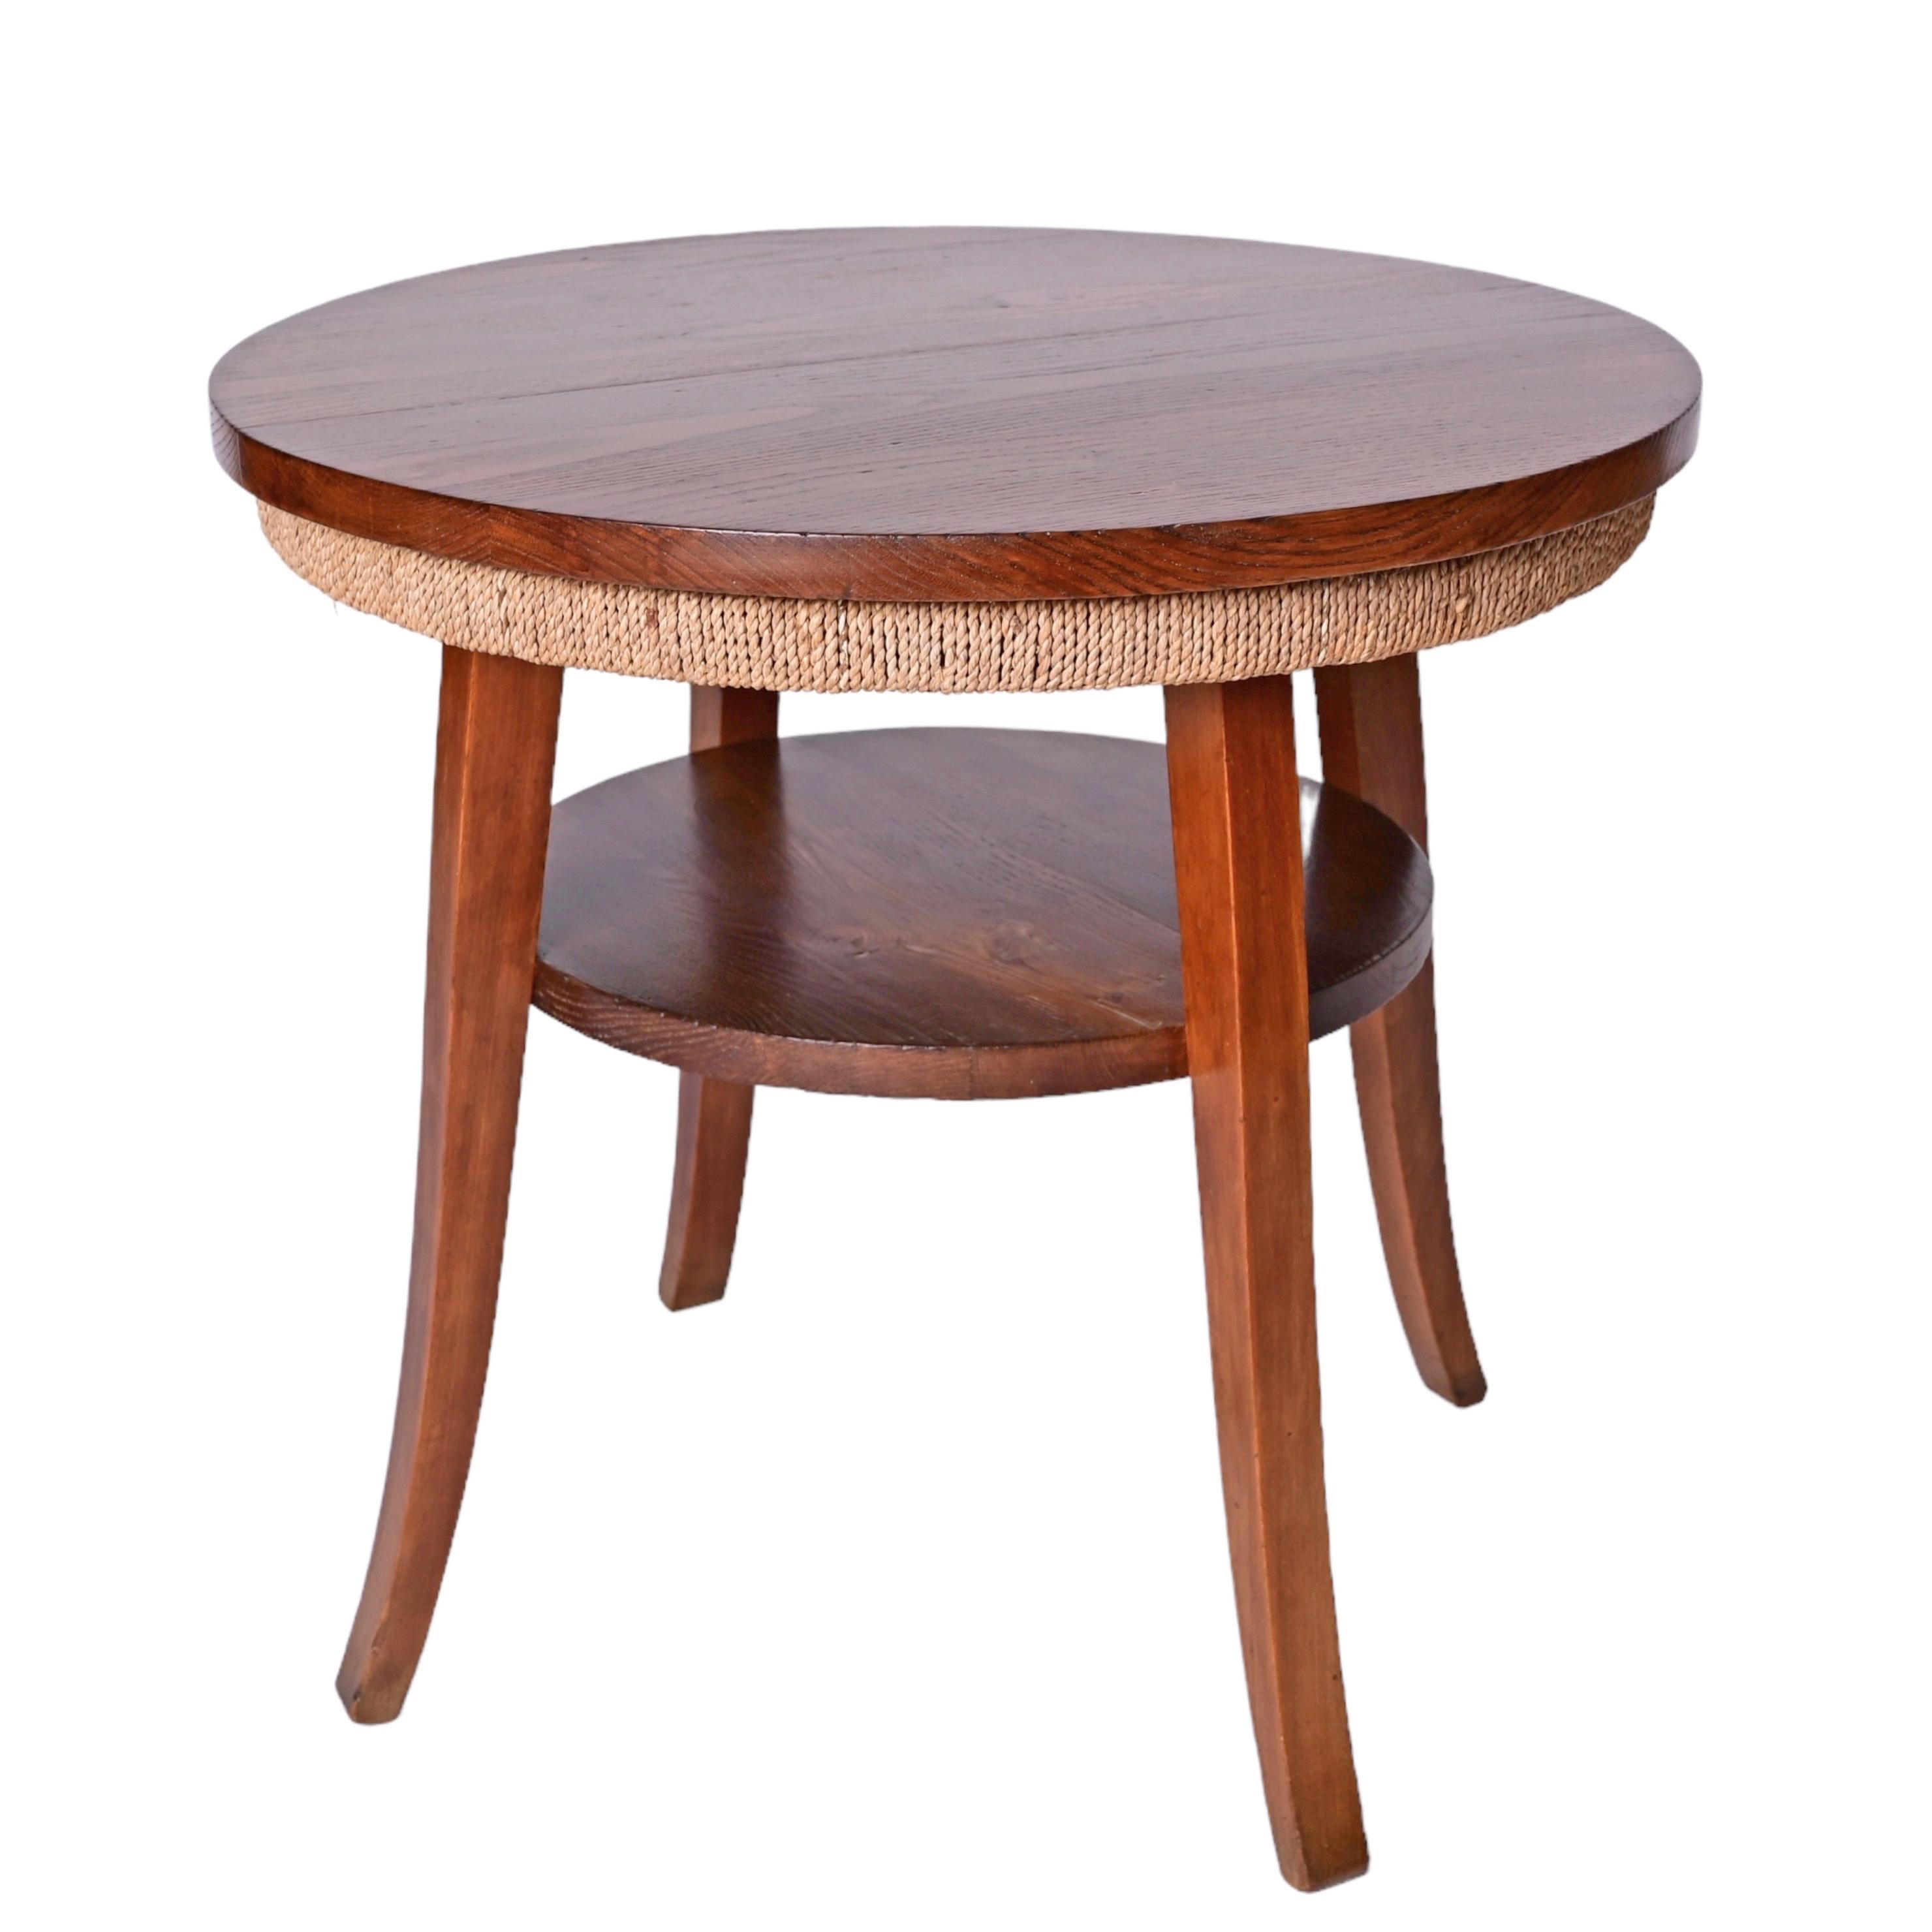 Midcentury Two-Tier Round Rope and Chestnut Wood Italian Coffee Table, 1950s For Sale 7